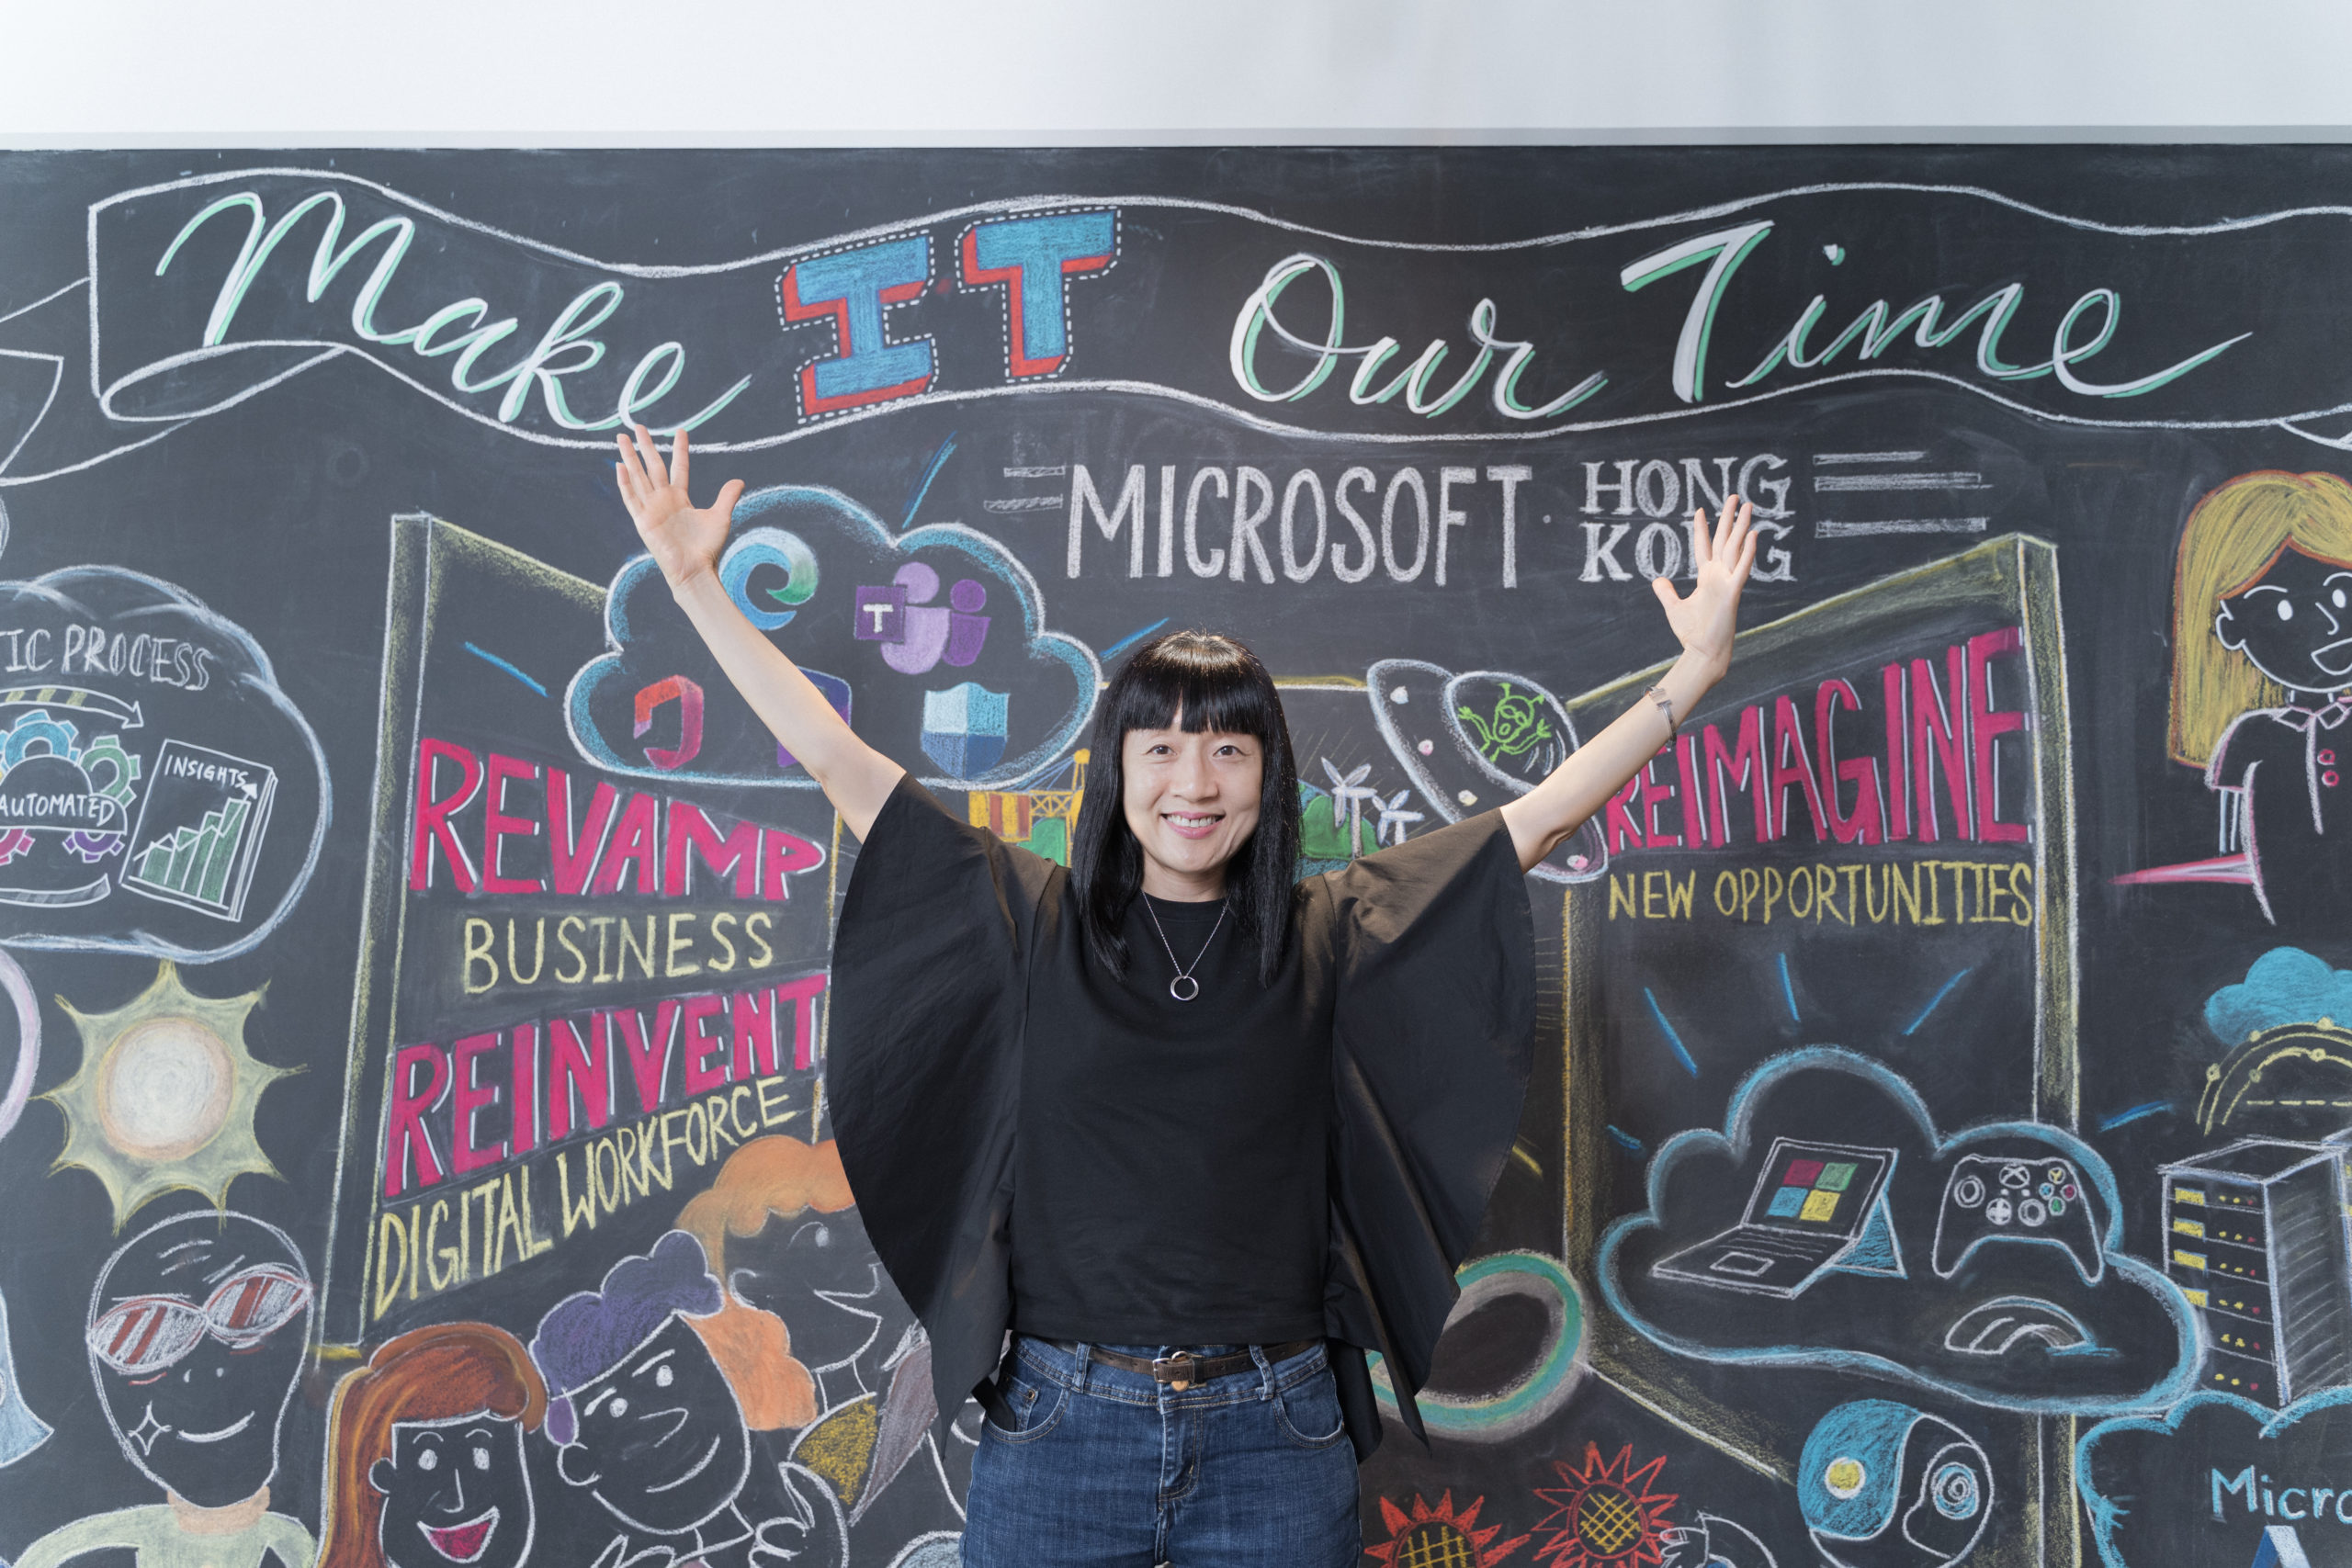 2021 marks Microsoft’s 30th anniversary in Hong Kong. Cally hopes to lead her team to realise their vision and “Make IT Our Time”.